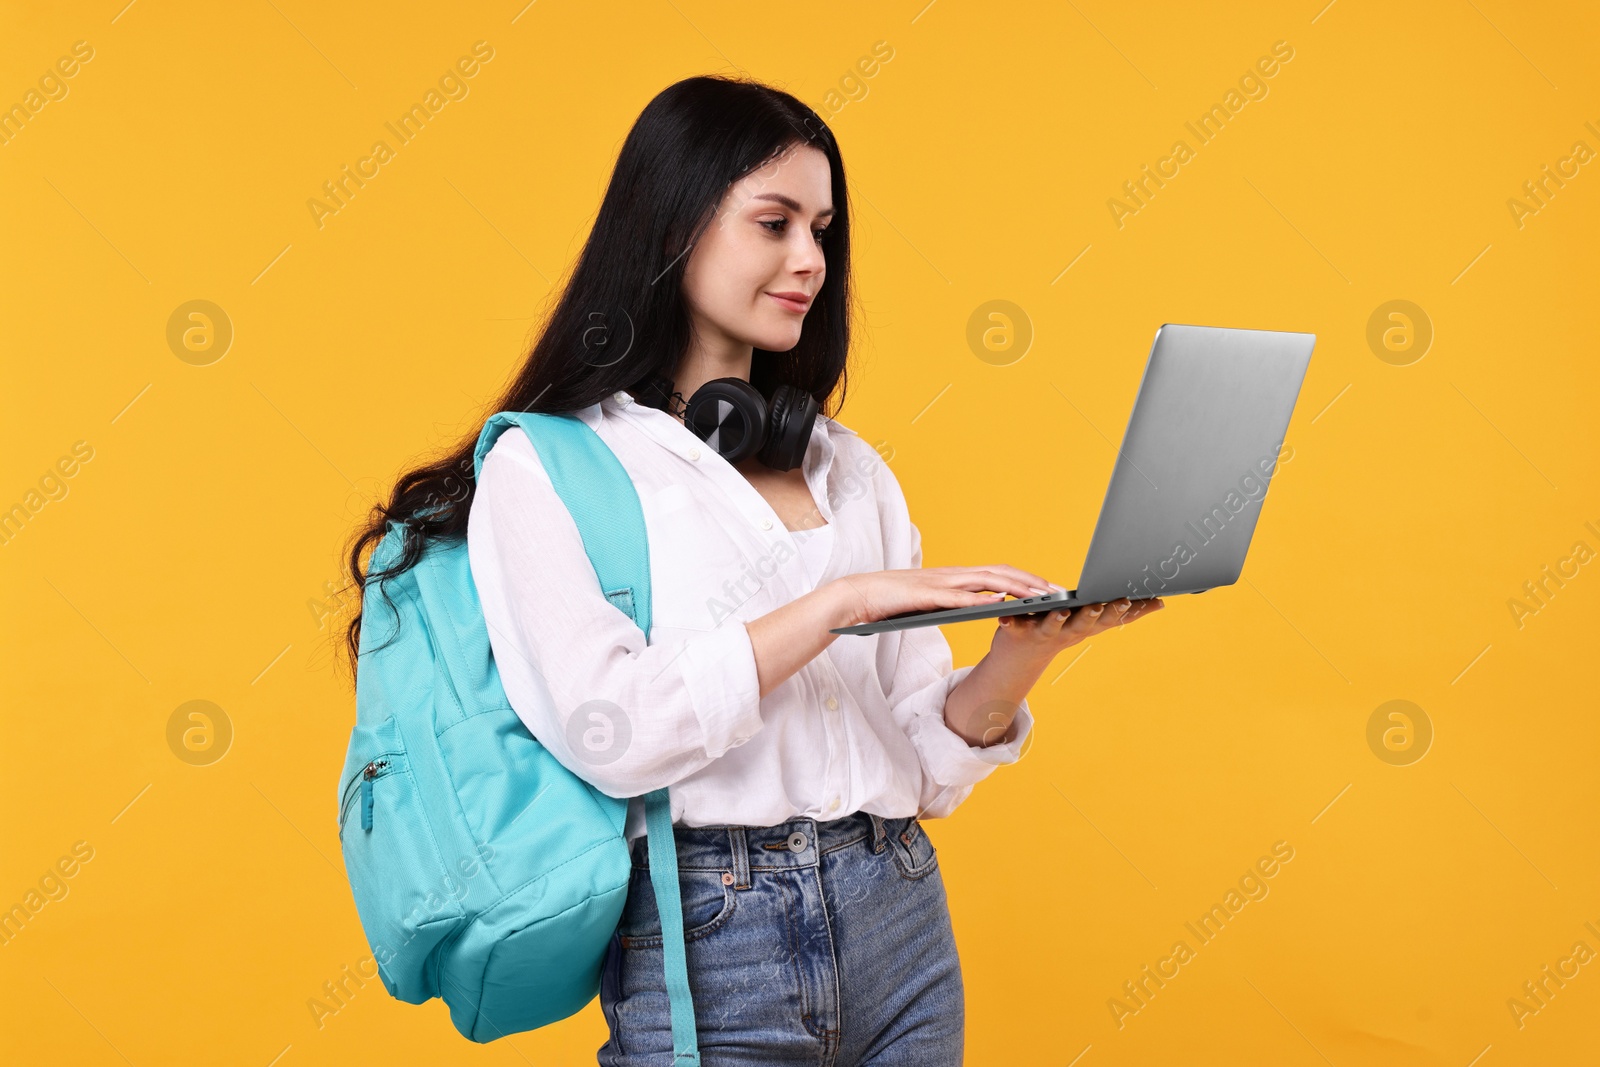 Photo of Student with laptop and backpack on yellow background